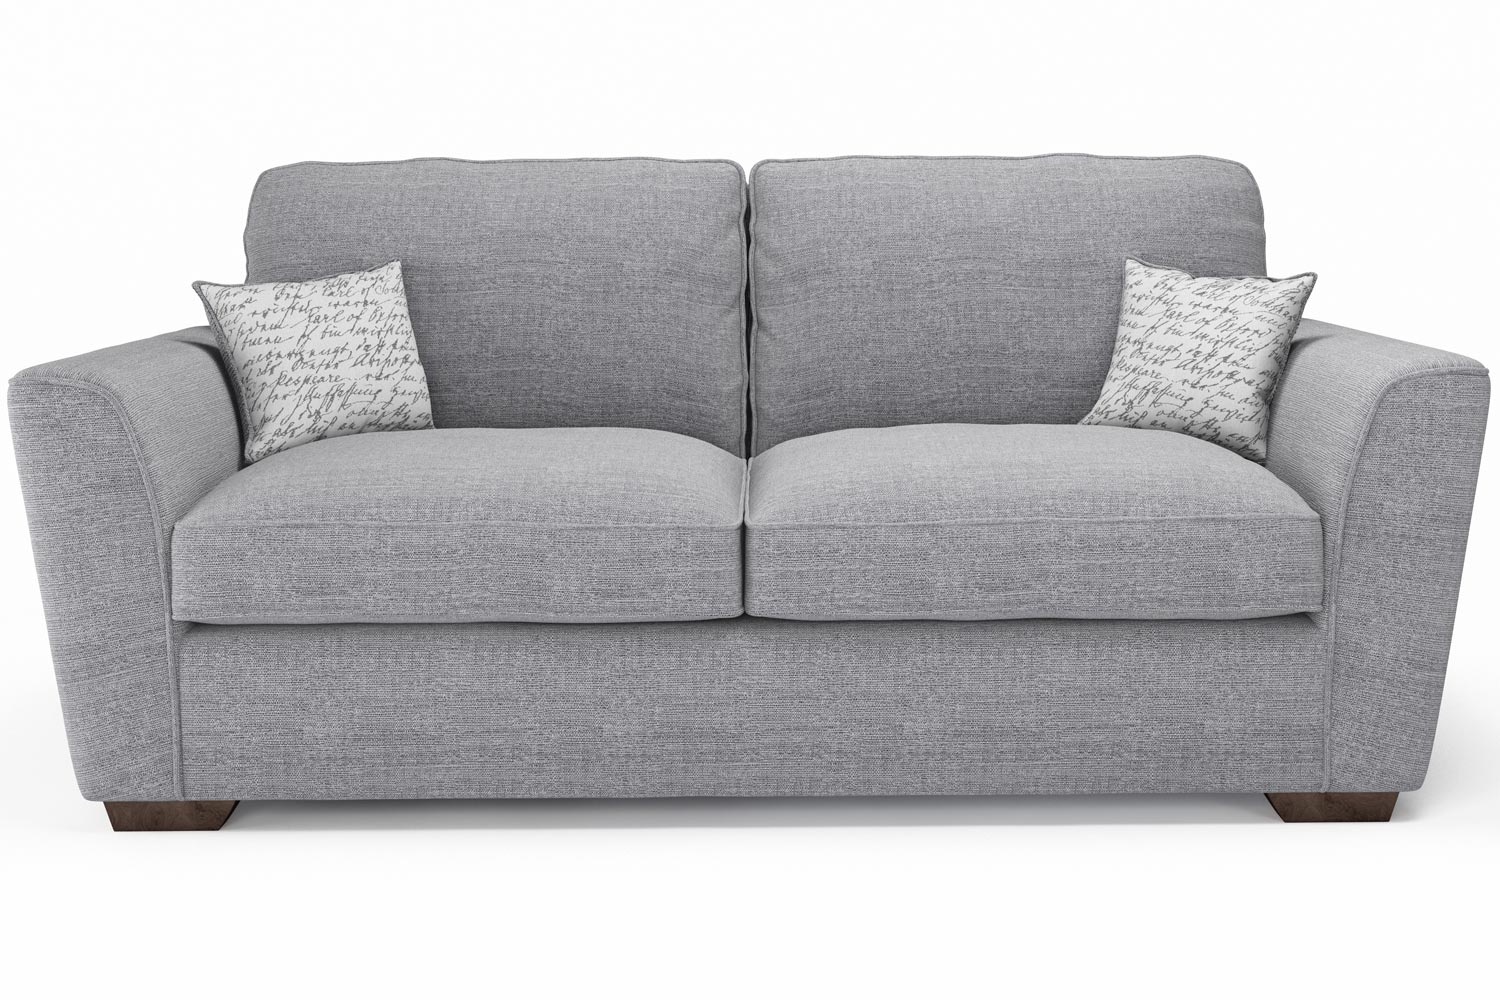 Fantasia 3 Seater Sofa. 5 out of 5 stars. Read reviews.